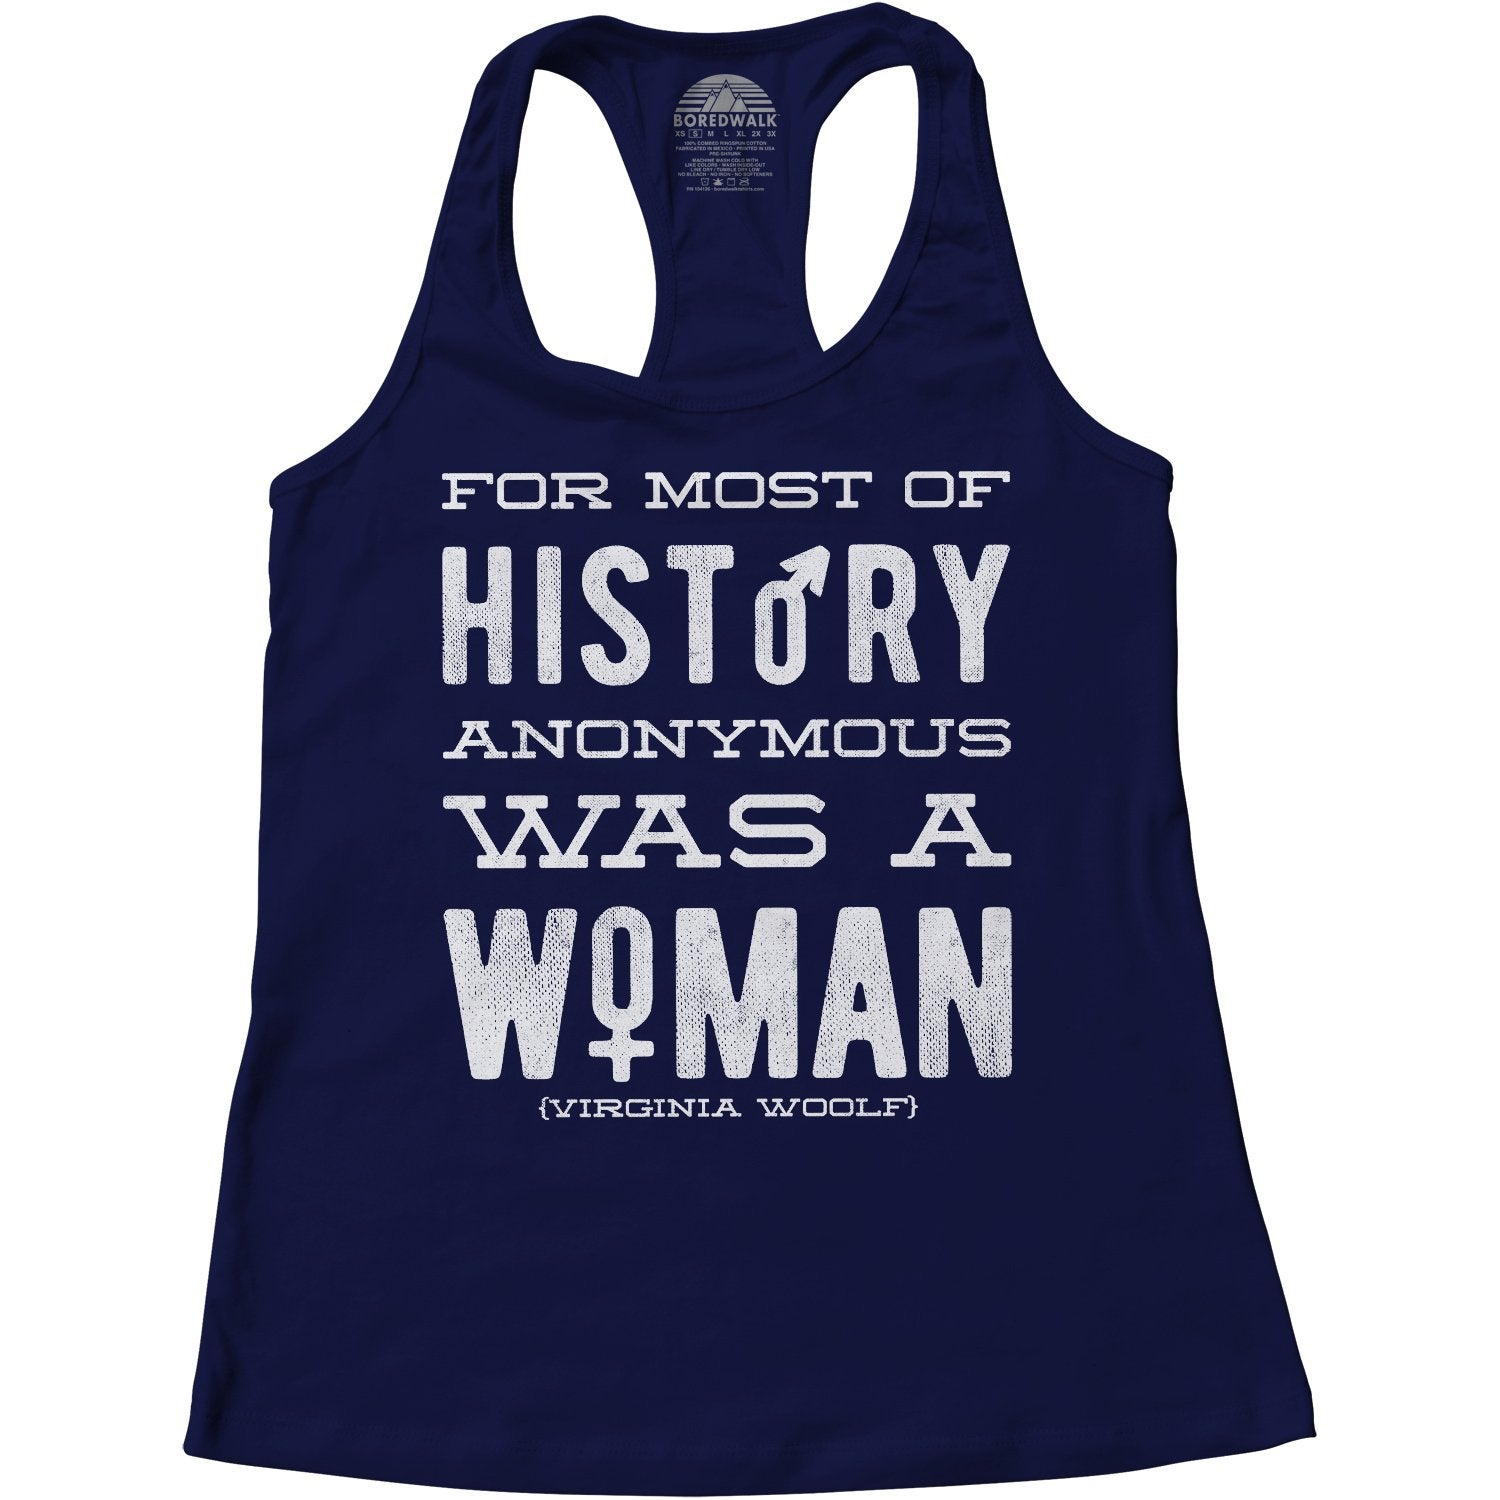 Women's For Most of History Anonymous Was a Woman Racerback Tank Top